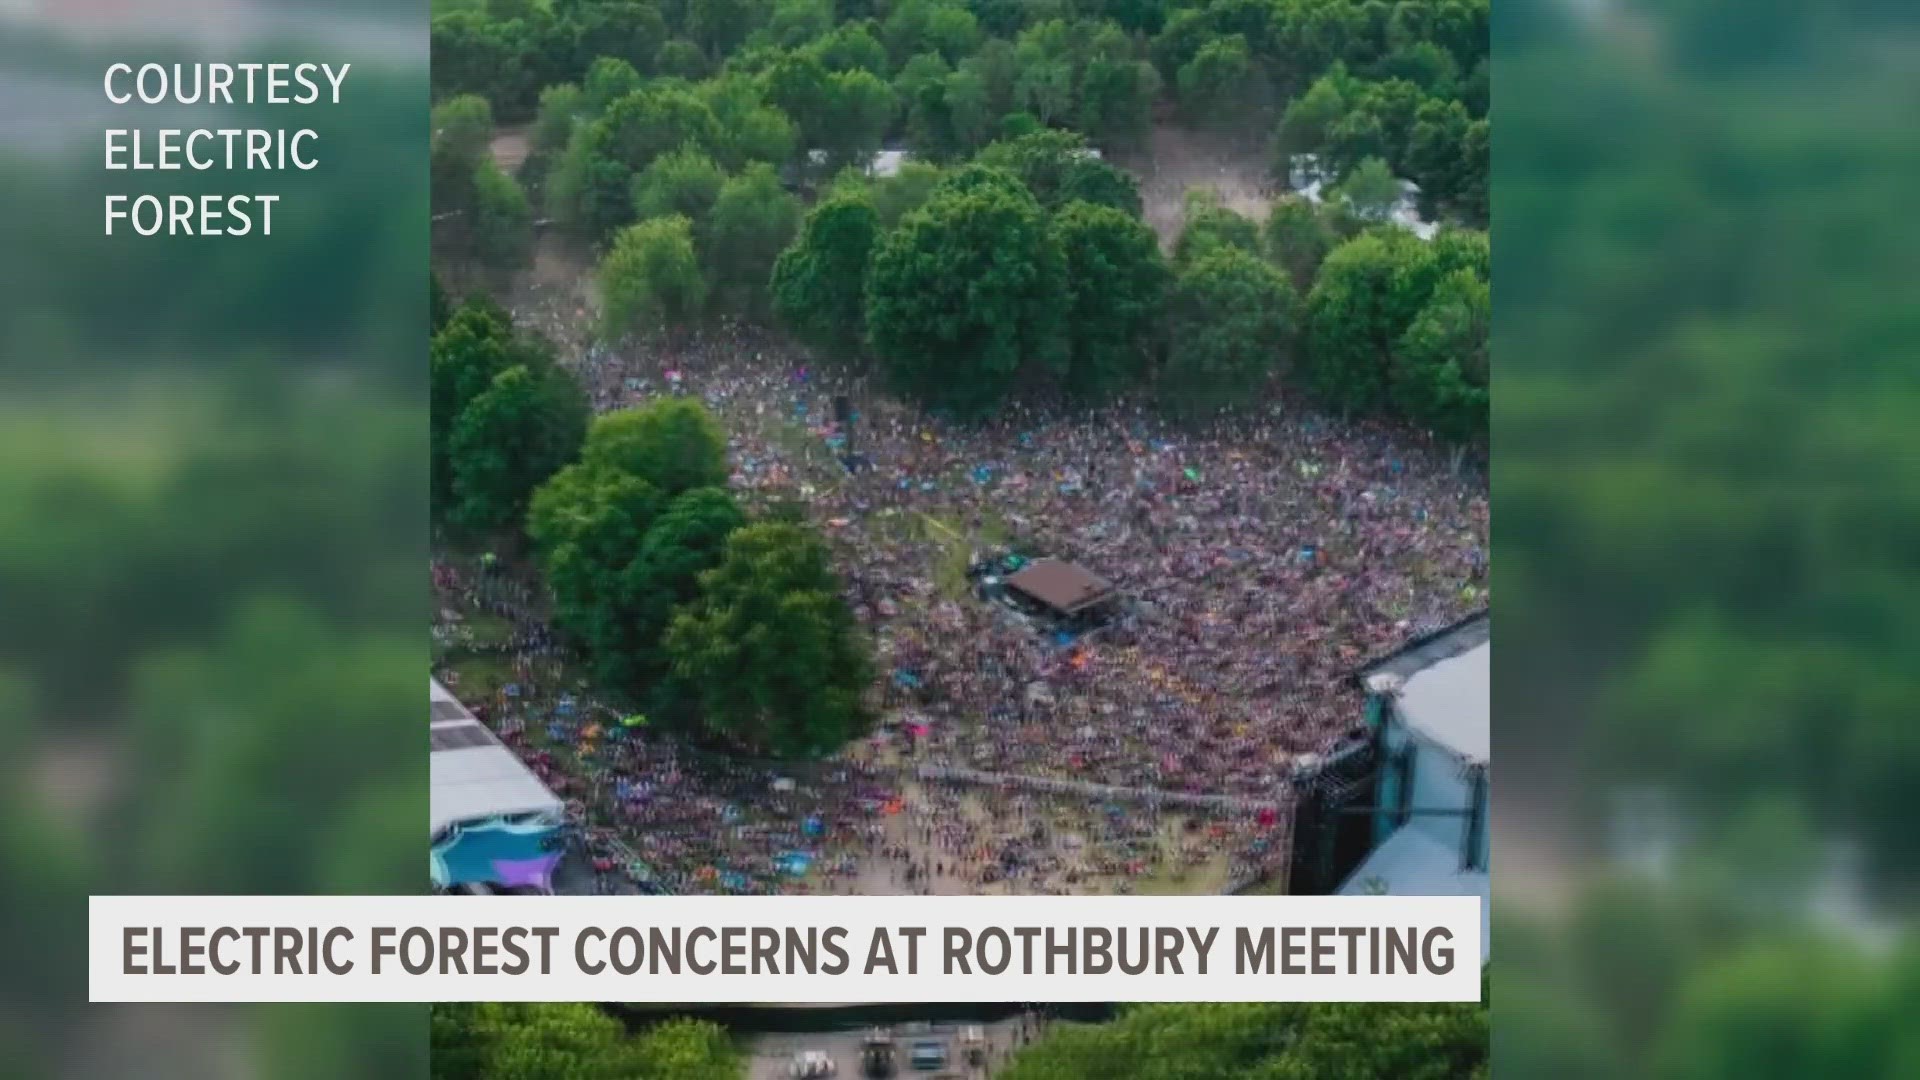 Residents raise concern over Electric Forest festival at Rothbury City meeting.